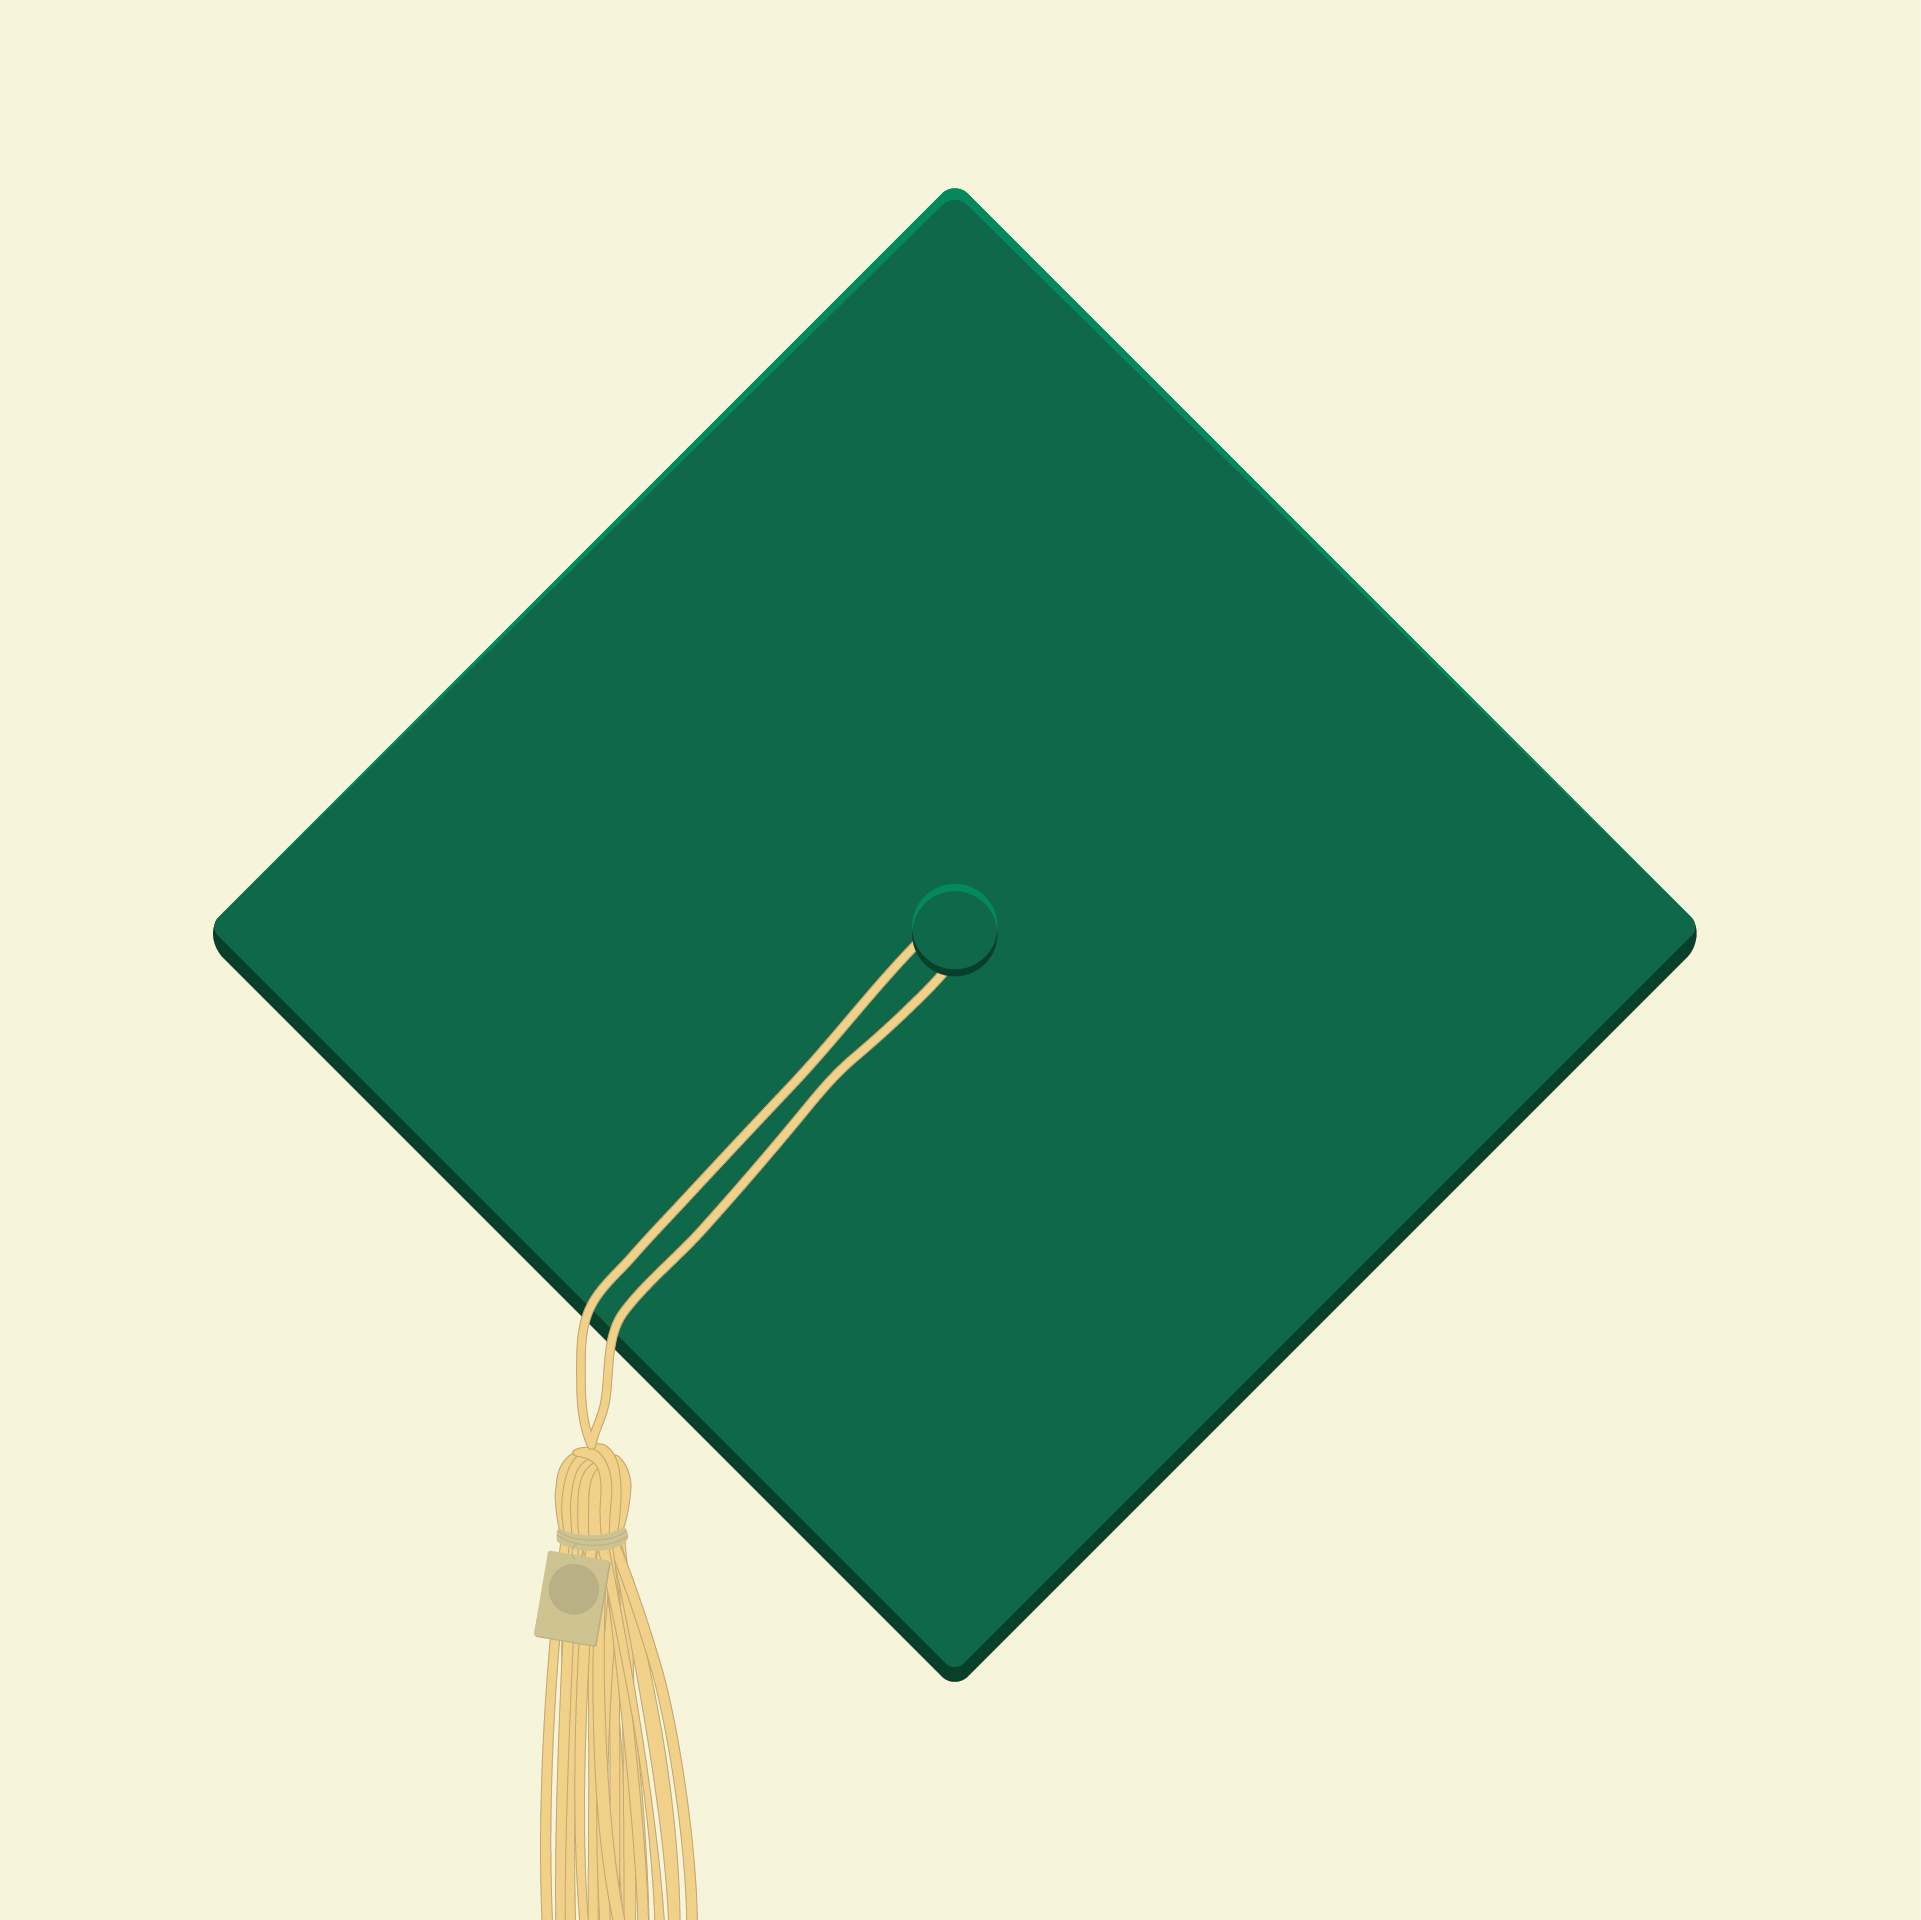 Top of a green graduation cap with a gold tassle